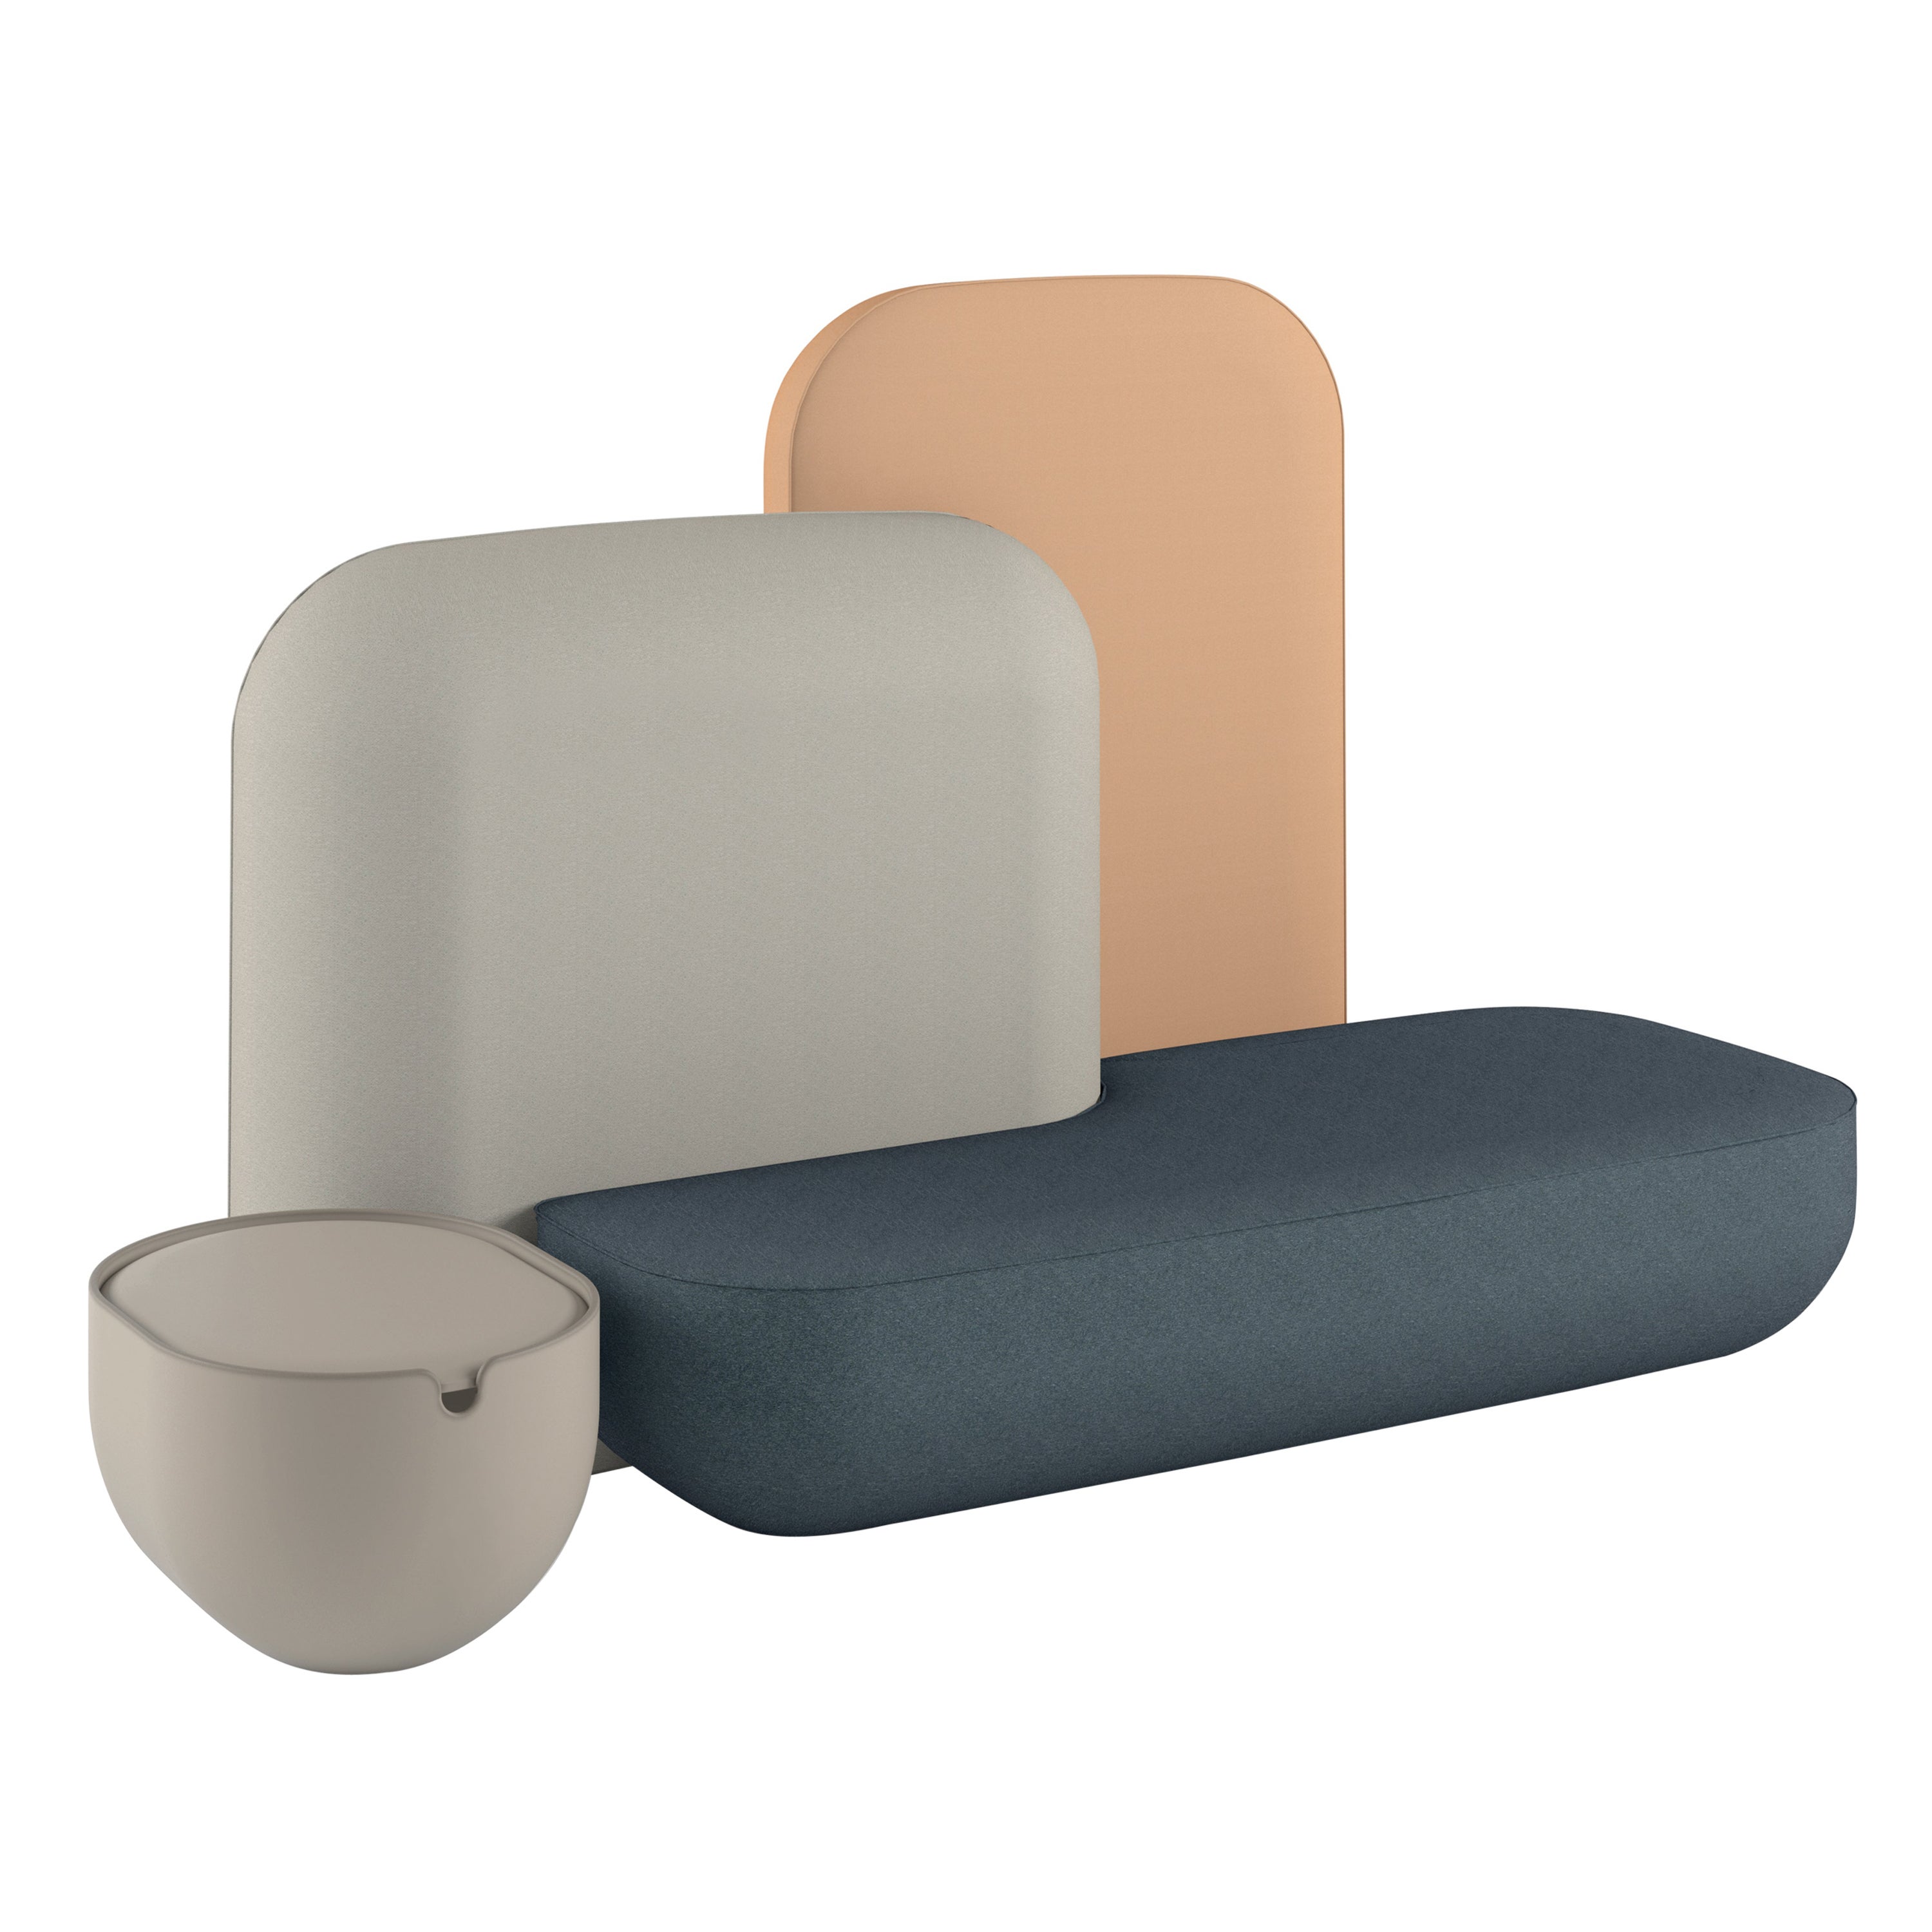 Alias Okome 004 Upholstered Seat with Backrest and Optional Table by Nendo